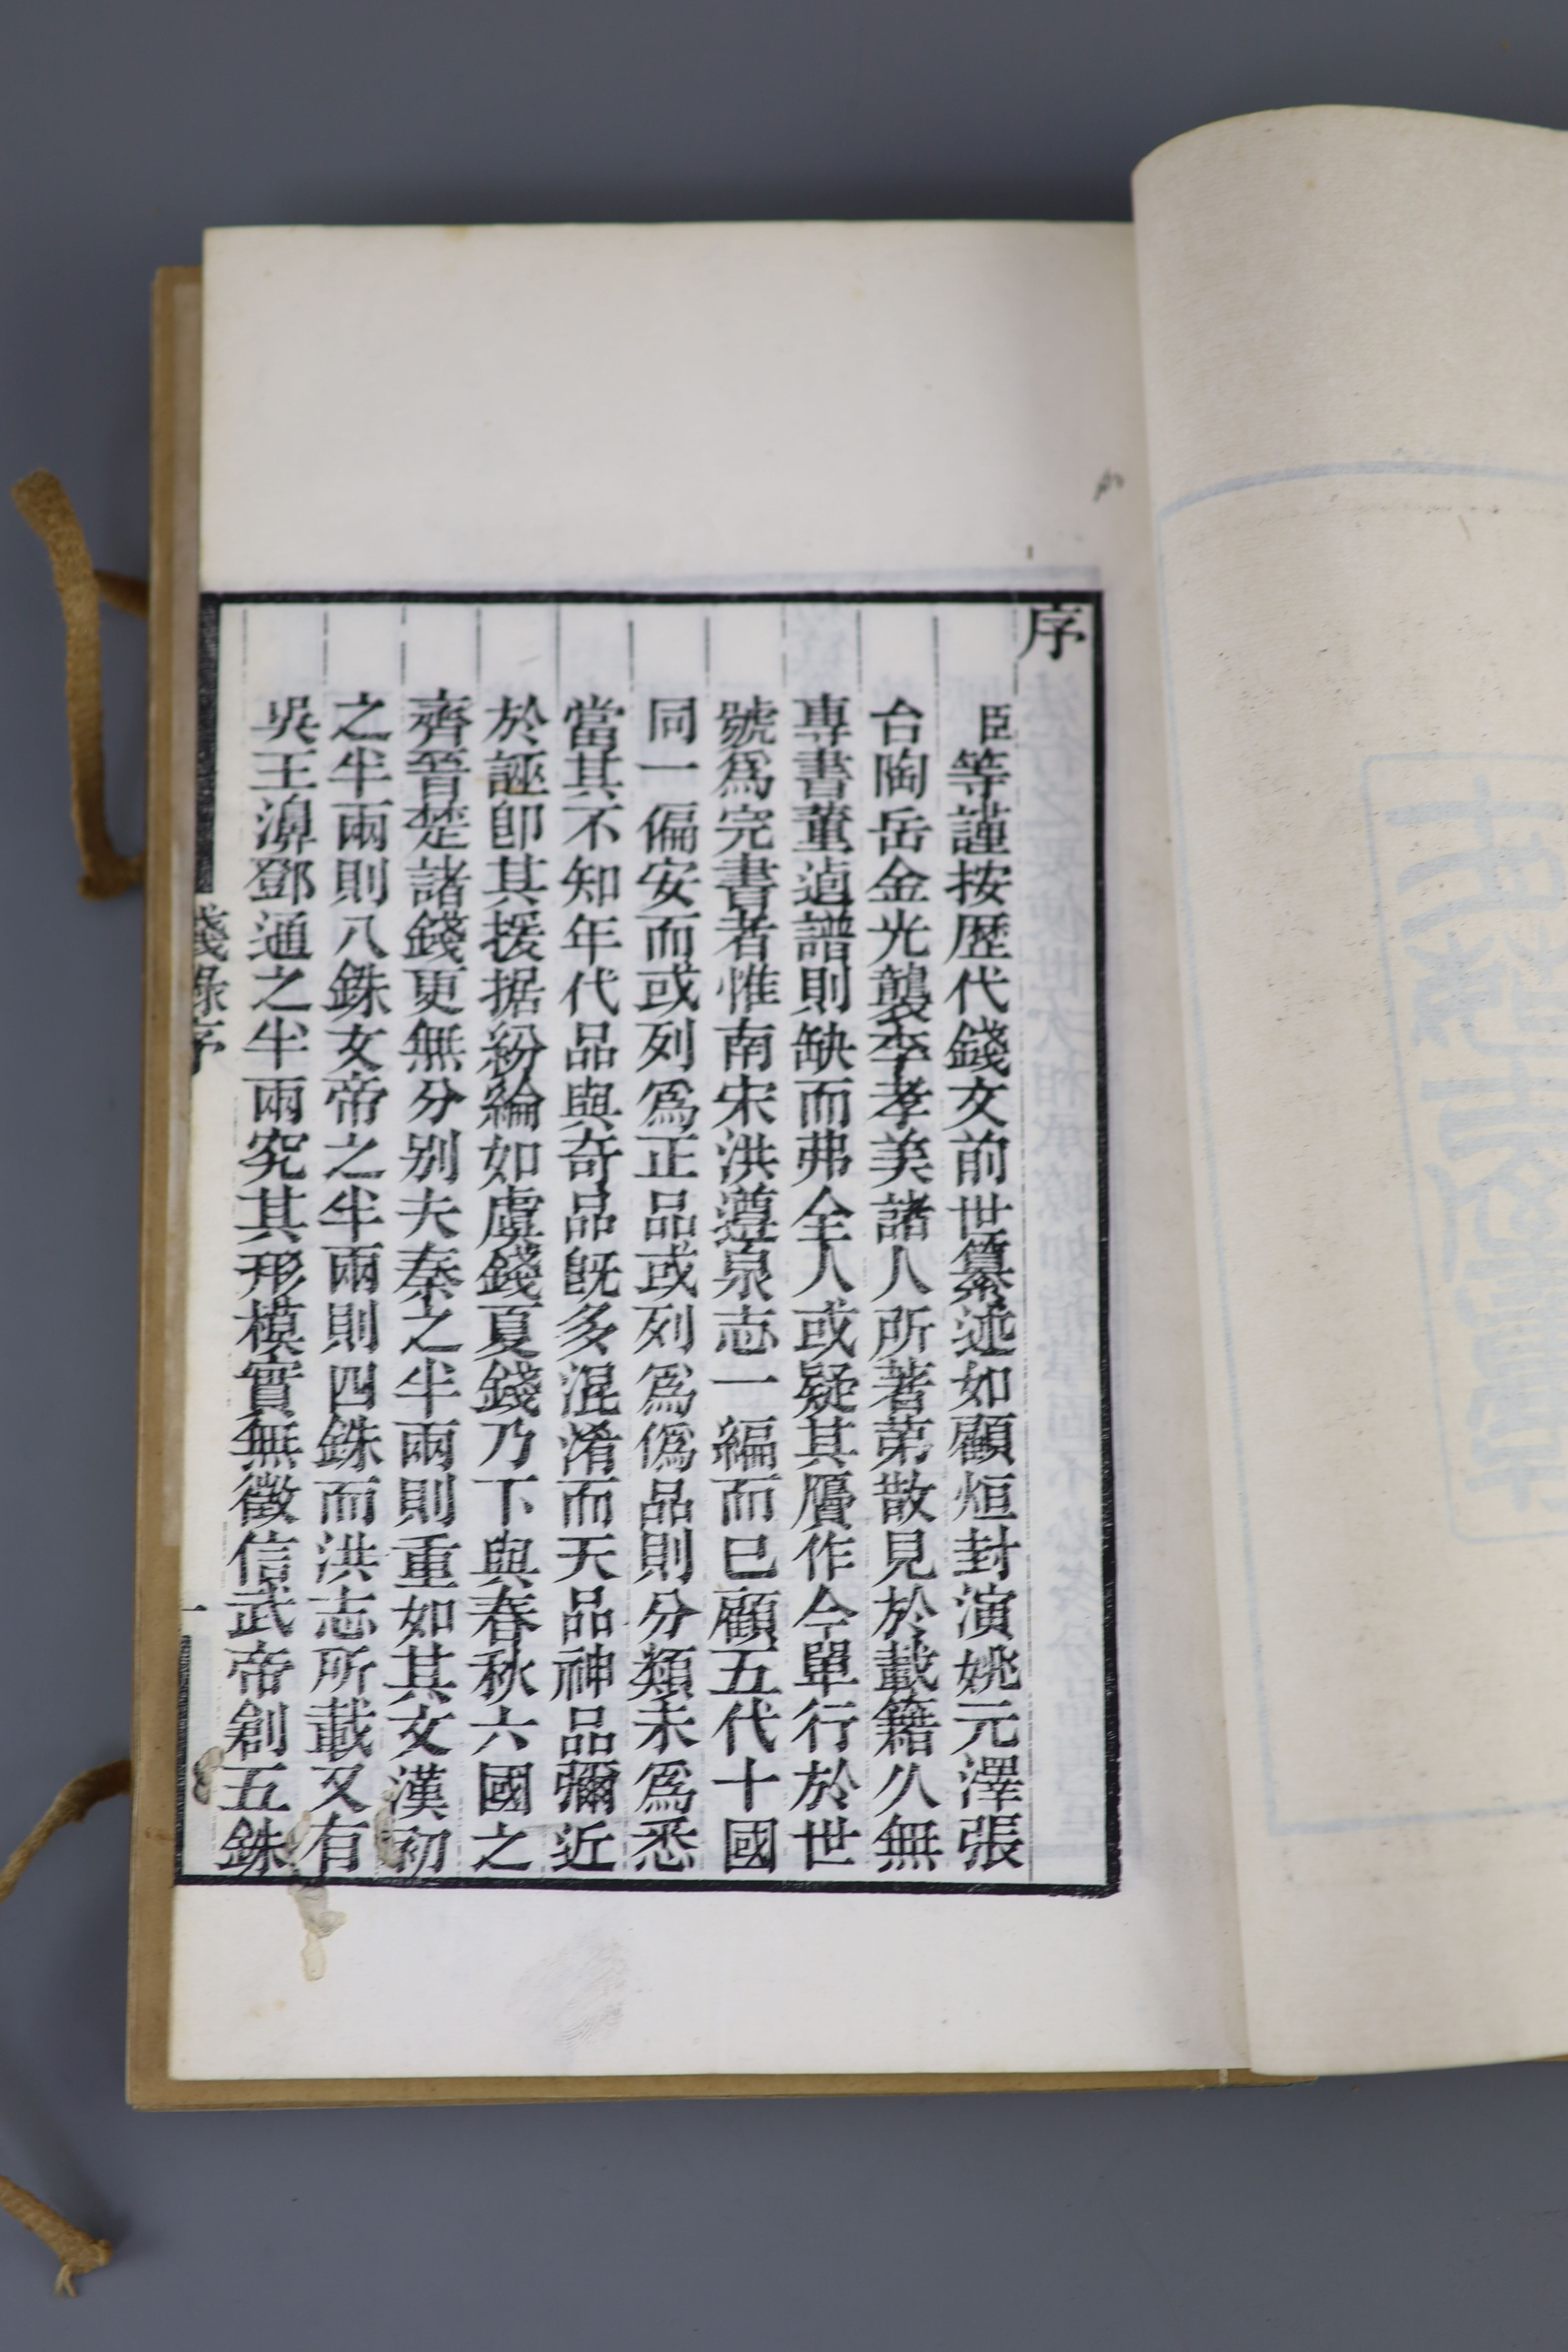 Liang Shizheng, 'Qin ding qian lu', Record of Chinese Coins published under Imperial Instructions, Provenance - A. T. Arber-Cooke